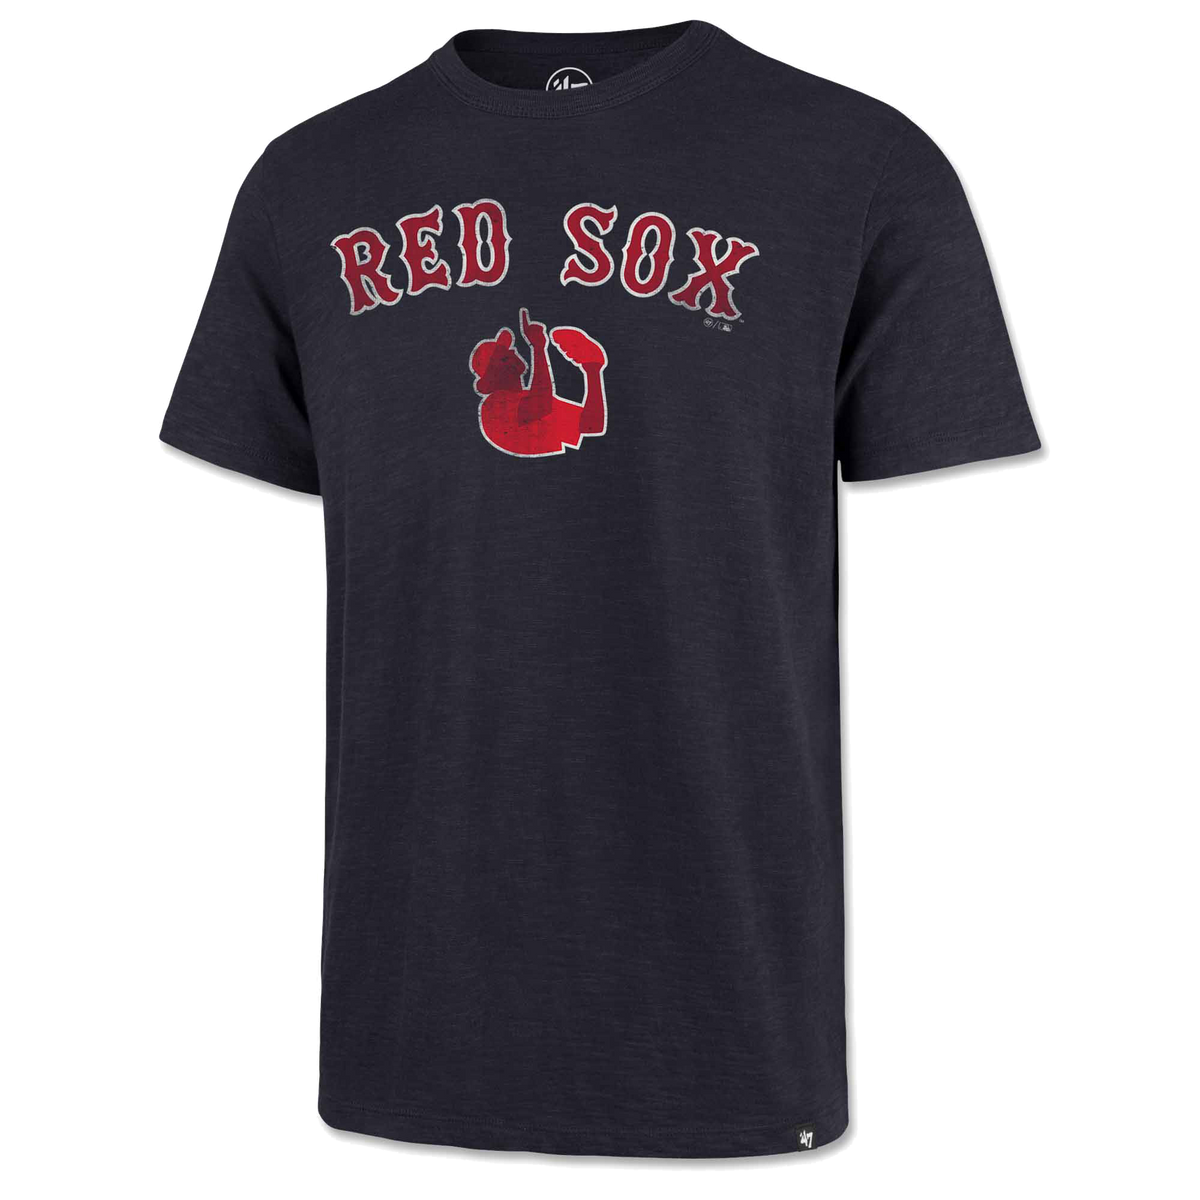 pedromartinezfoundation Red Sox T-Shirt with Custom Pedro Martinez Logo Pedro Martinez Boston Red Sox HOF T-Shirt Large